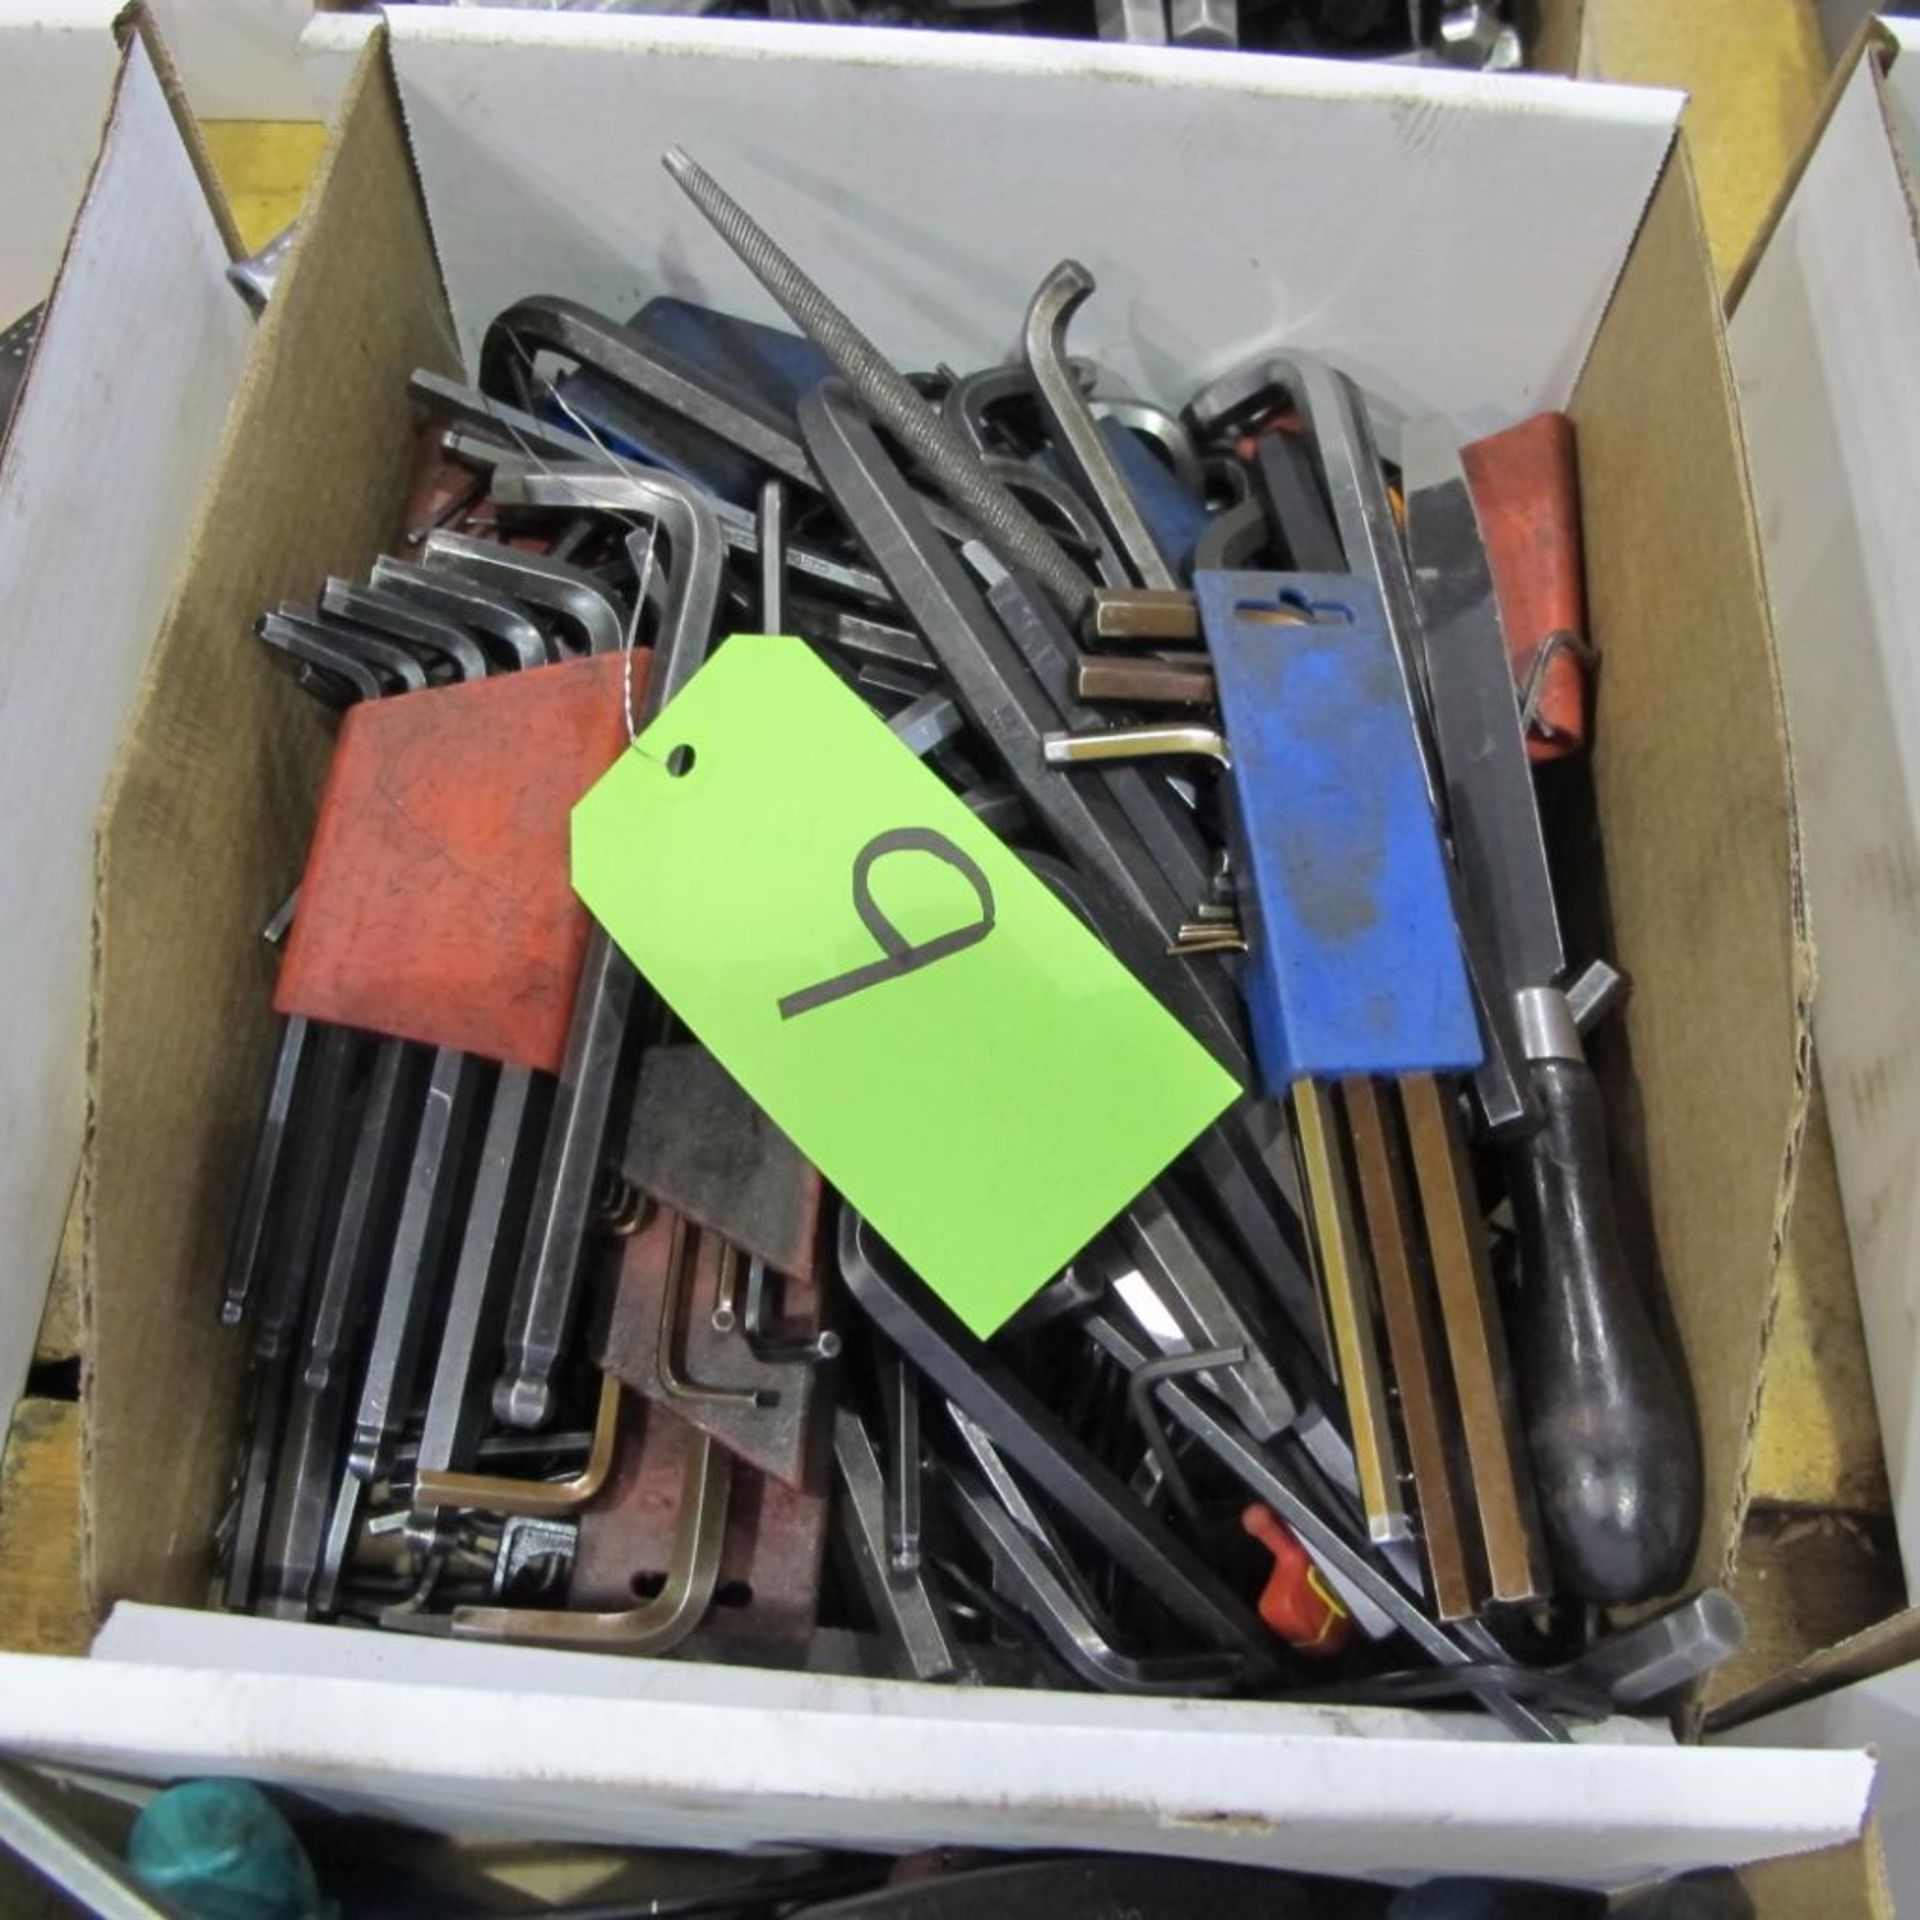 LOT OF 9 BOXES OF HAND TOOLS INCL ALLEN KEYS, FILES, HAMMERS/MALLETS, CUTTERS, CRESCENT WRENCHES DRI - Image 7 of 10